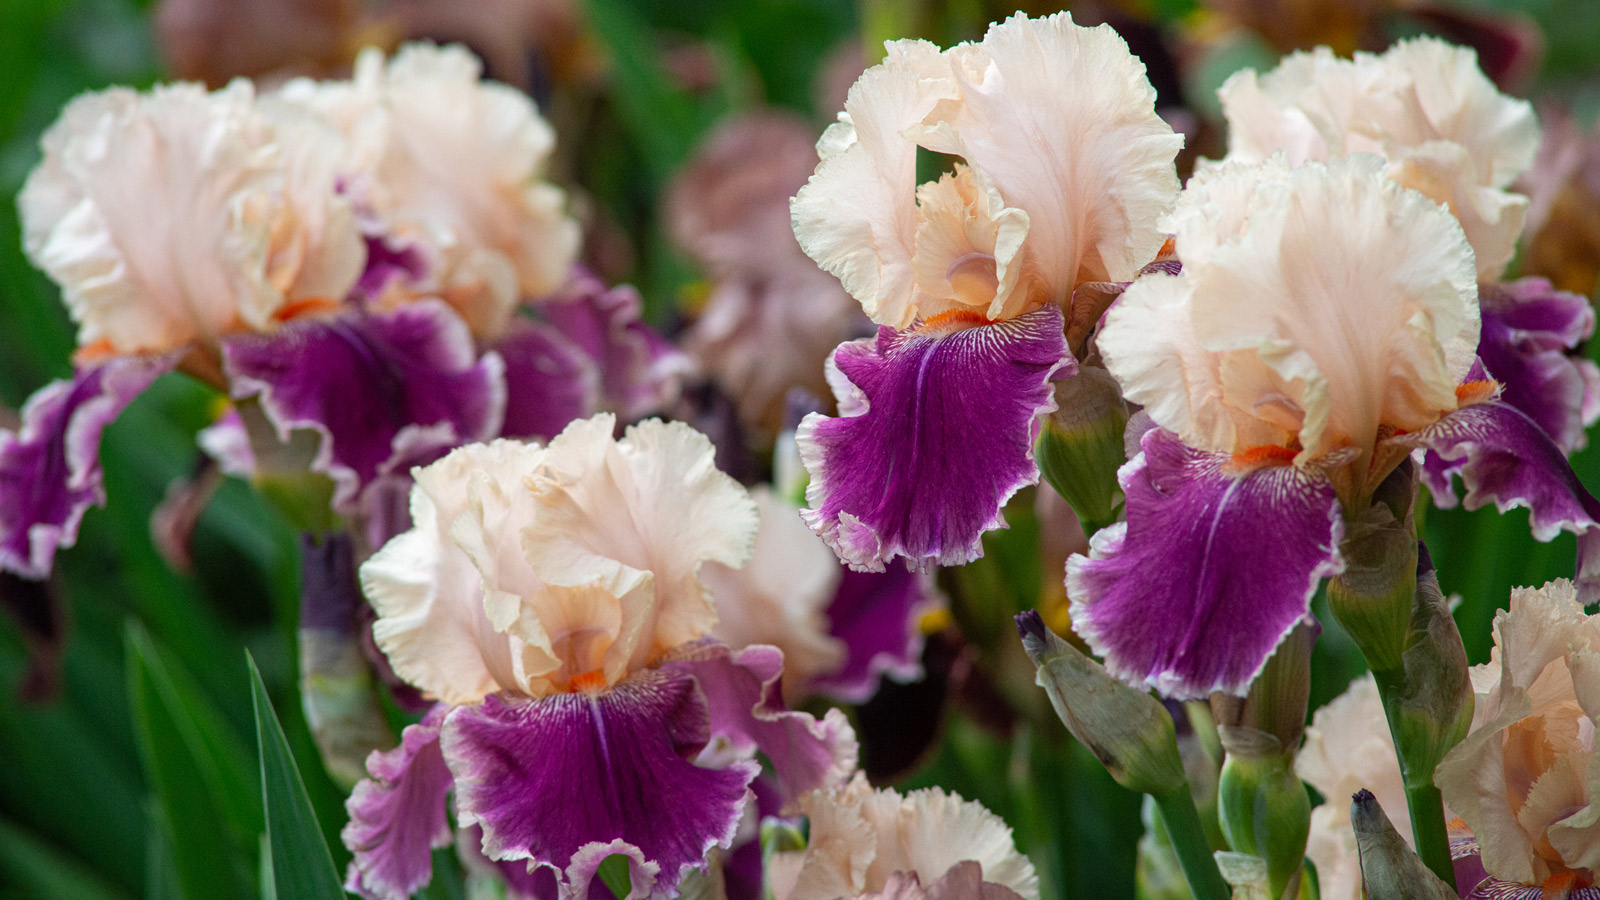 Bearded iris varieties – make a statement with these…